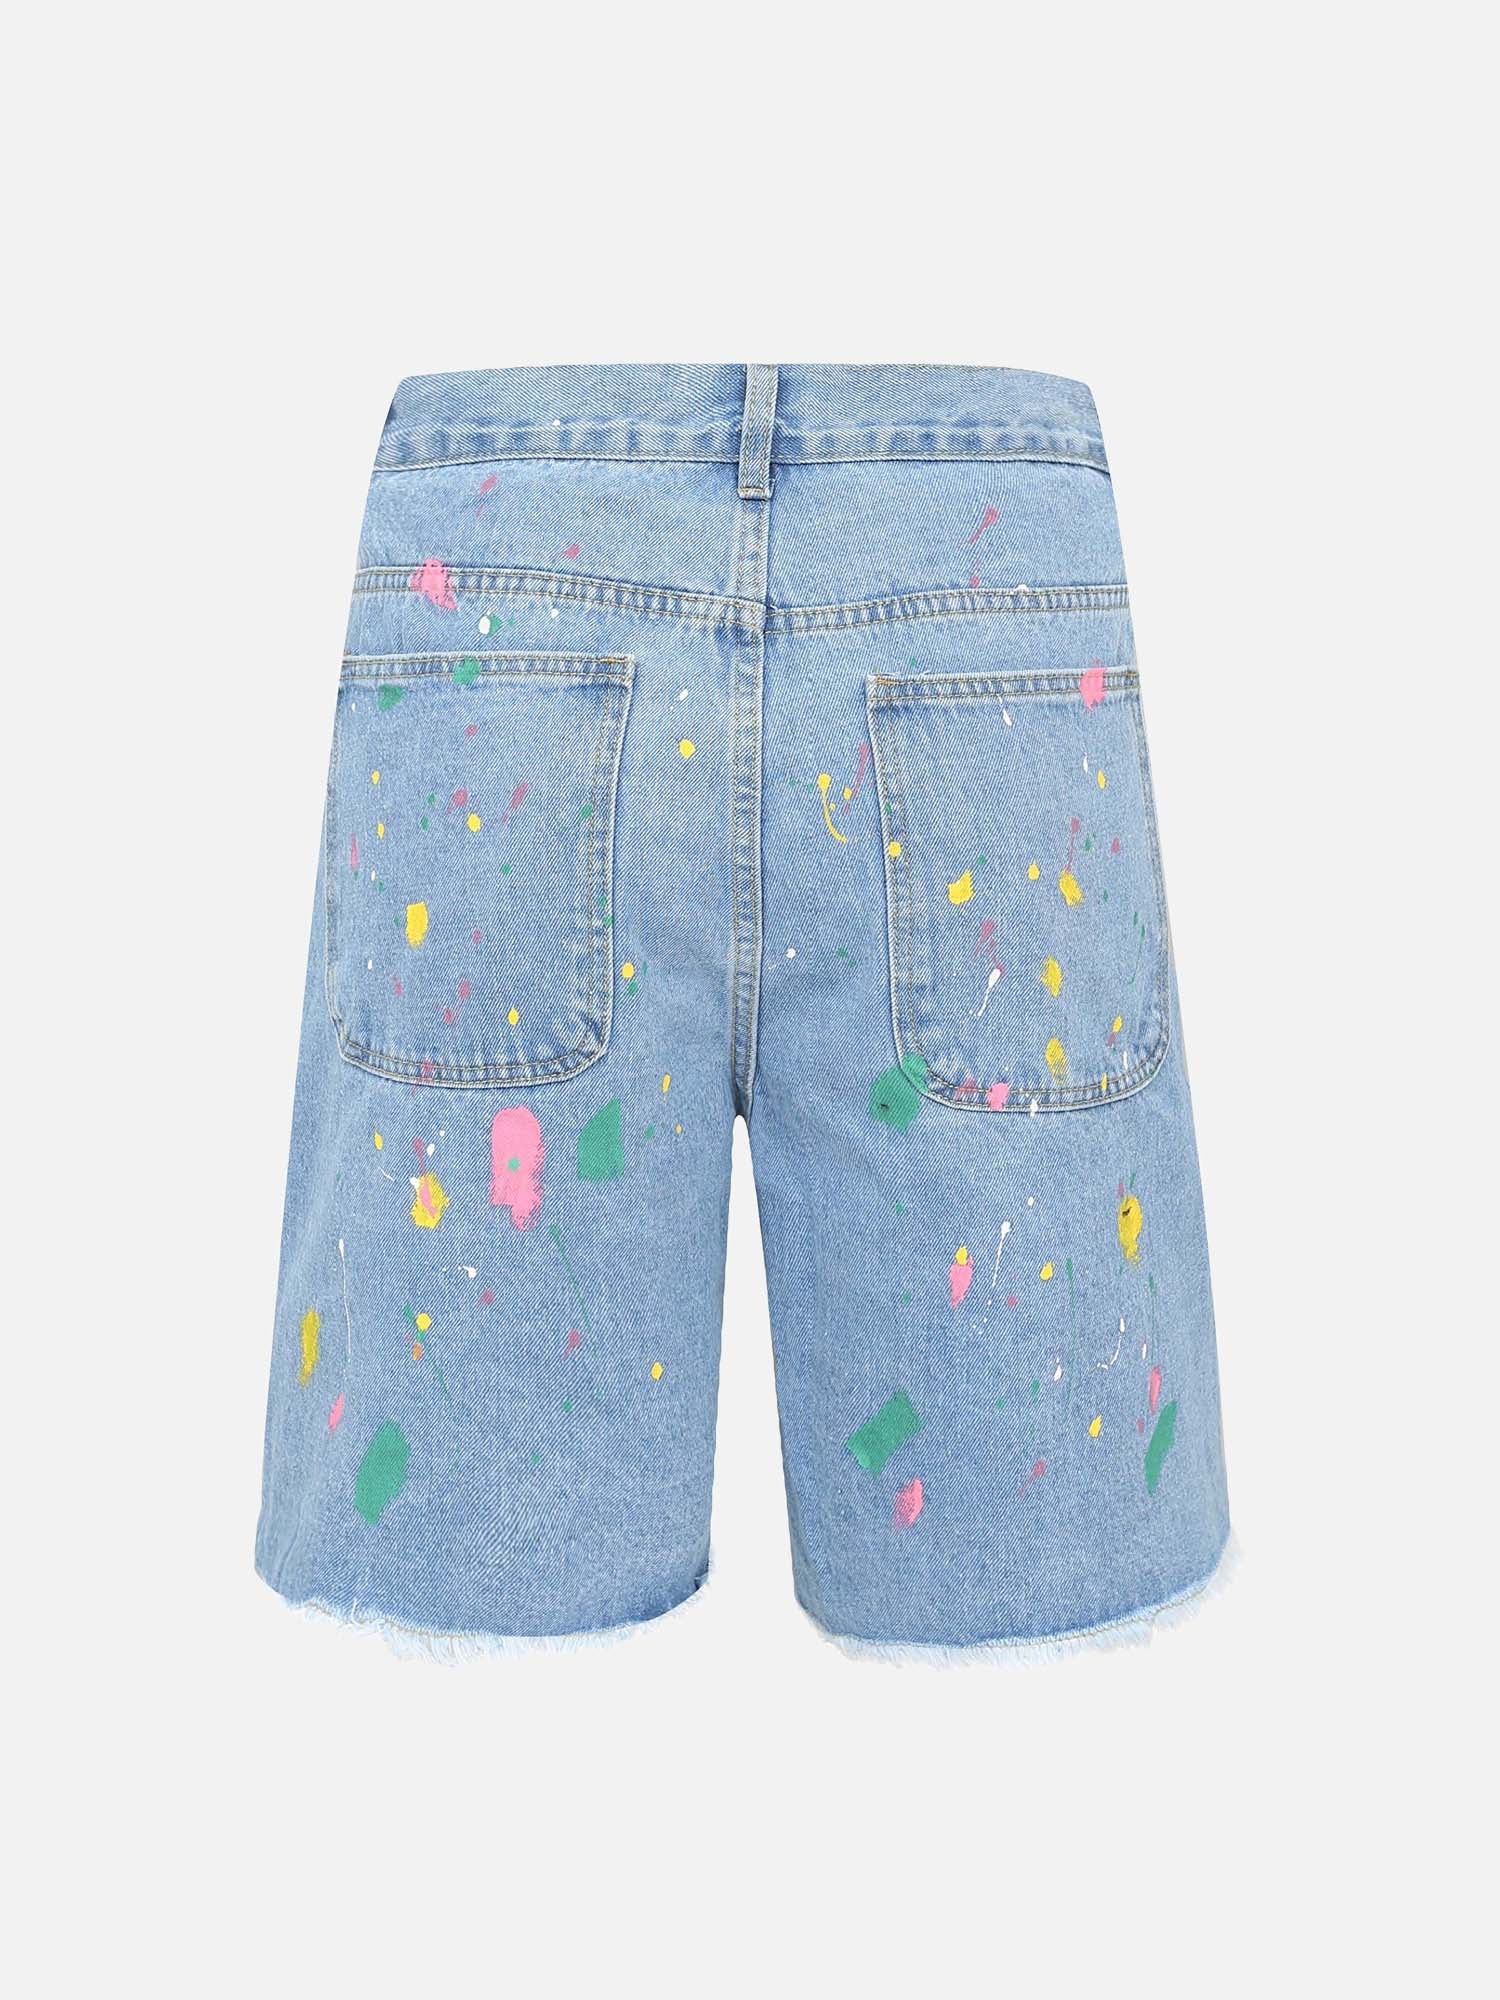 American Street Patch Flower Embroidered Cat Whiskers Denim Shorts Jorts